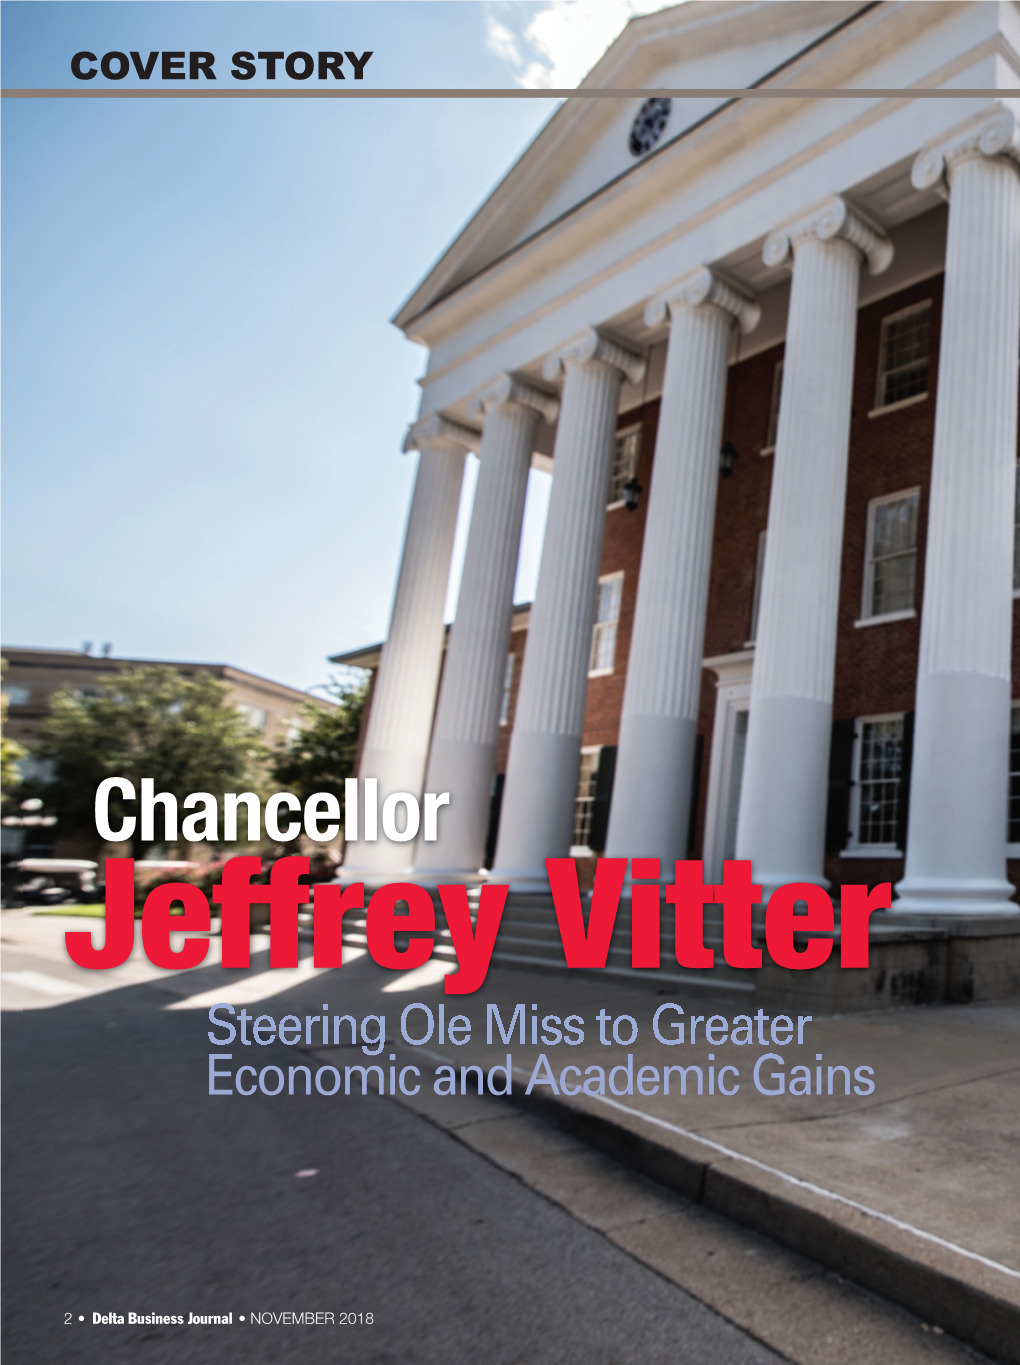 Chancellor Jeffrey Vitter Steering Ole Miss to Greater Economic and Academic Gains